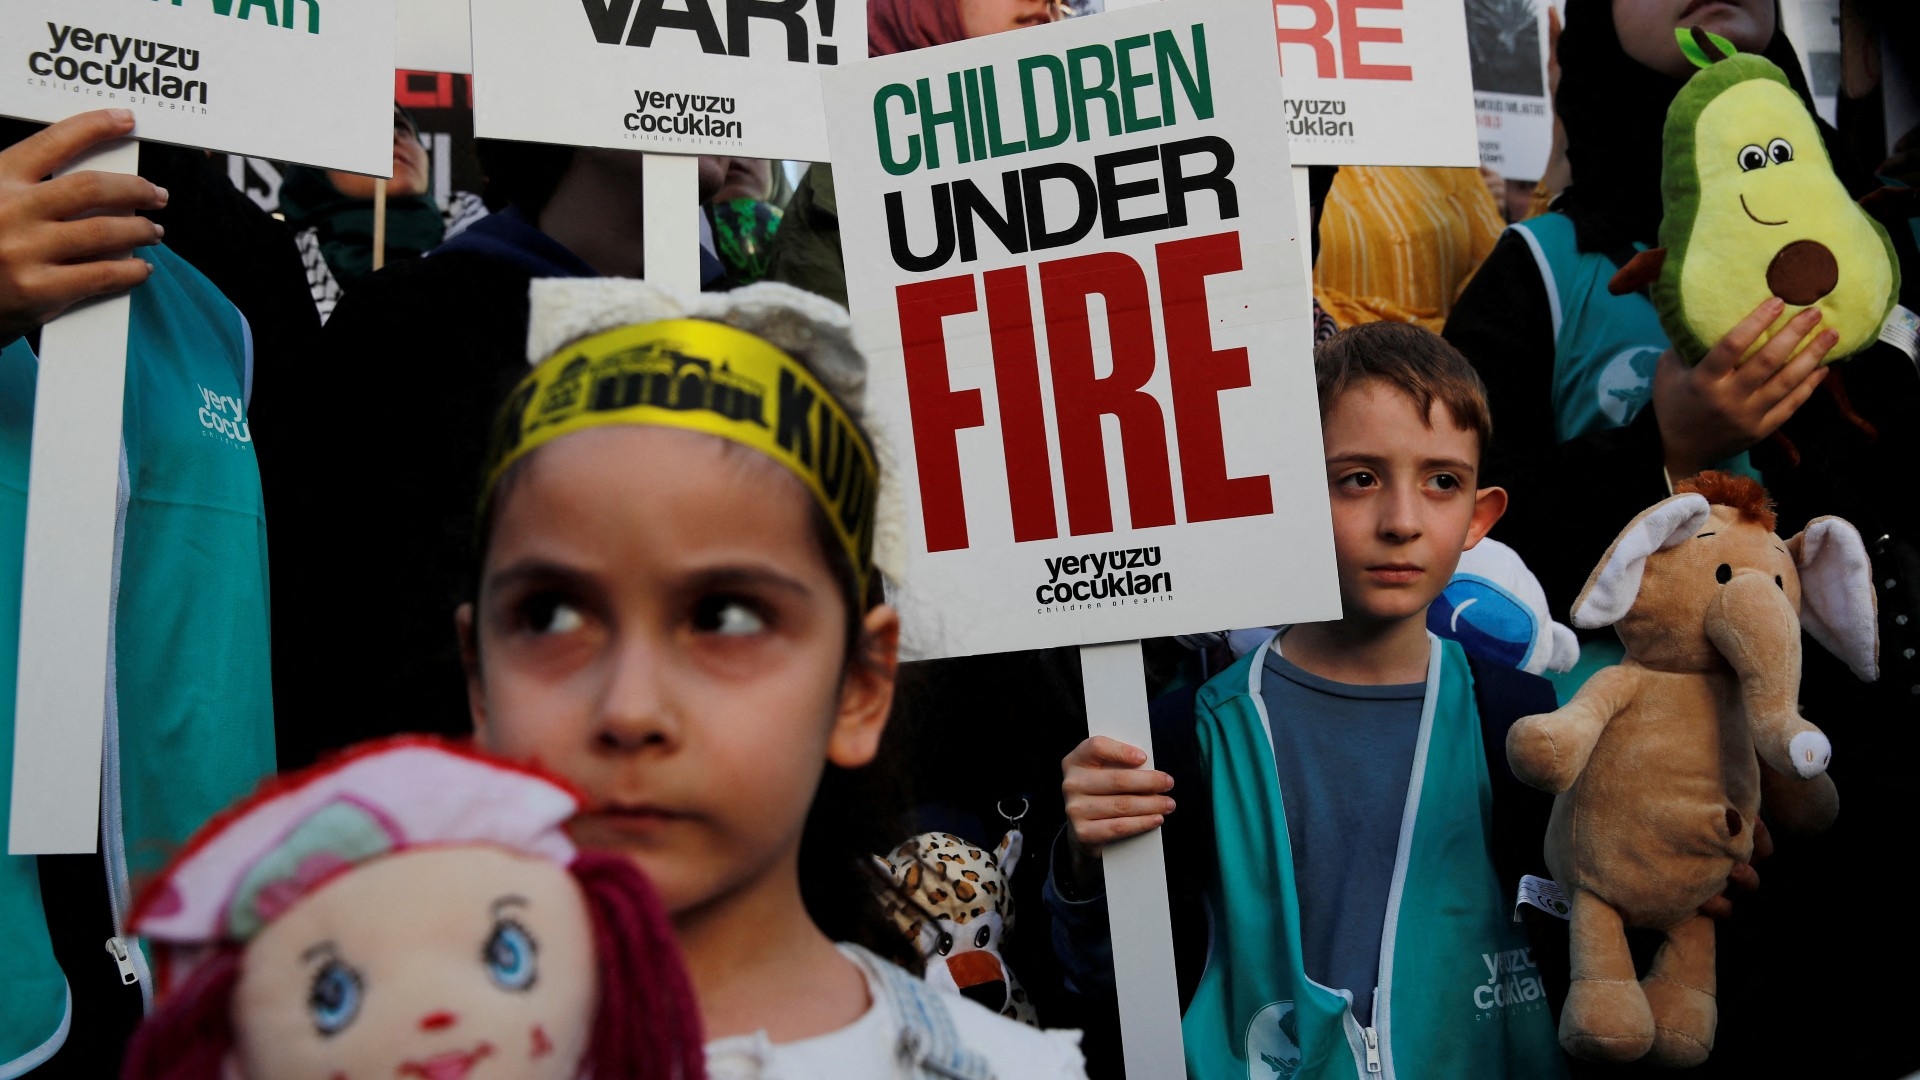 Children holding toys and signs take part in a protest against Israel near the Israeli consulate in Istanbul on 21 October (Reuters)